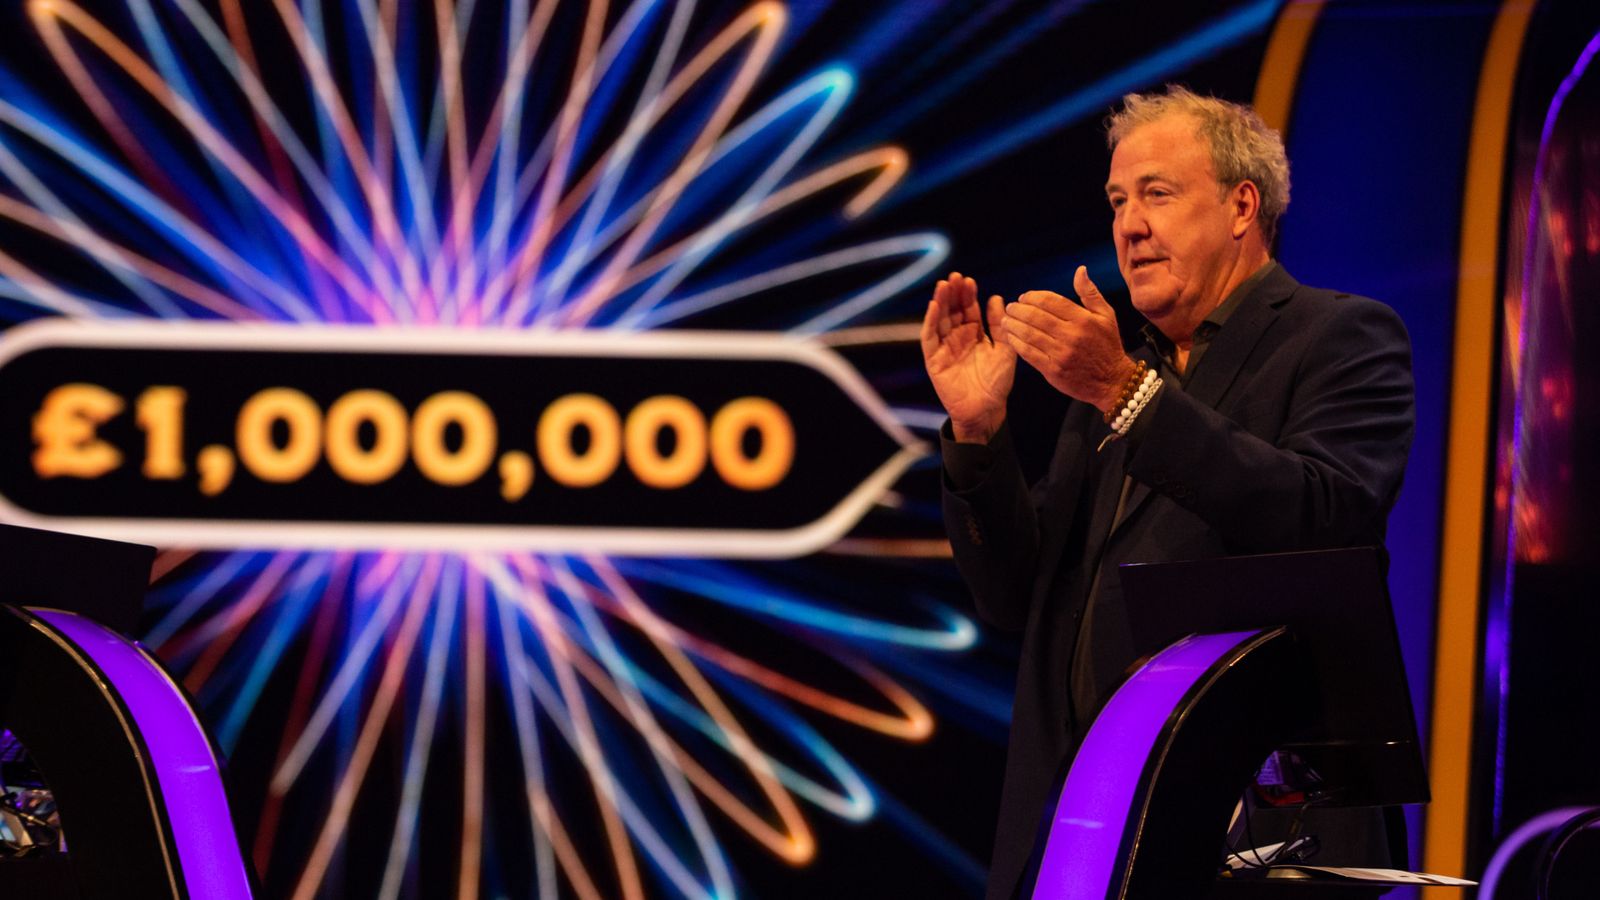 Jeremy Clarkson not cancelled as host of Who Wants To Be A Millionaire?, says ITV